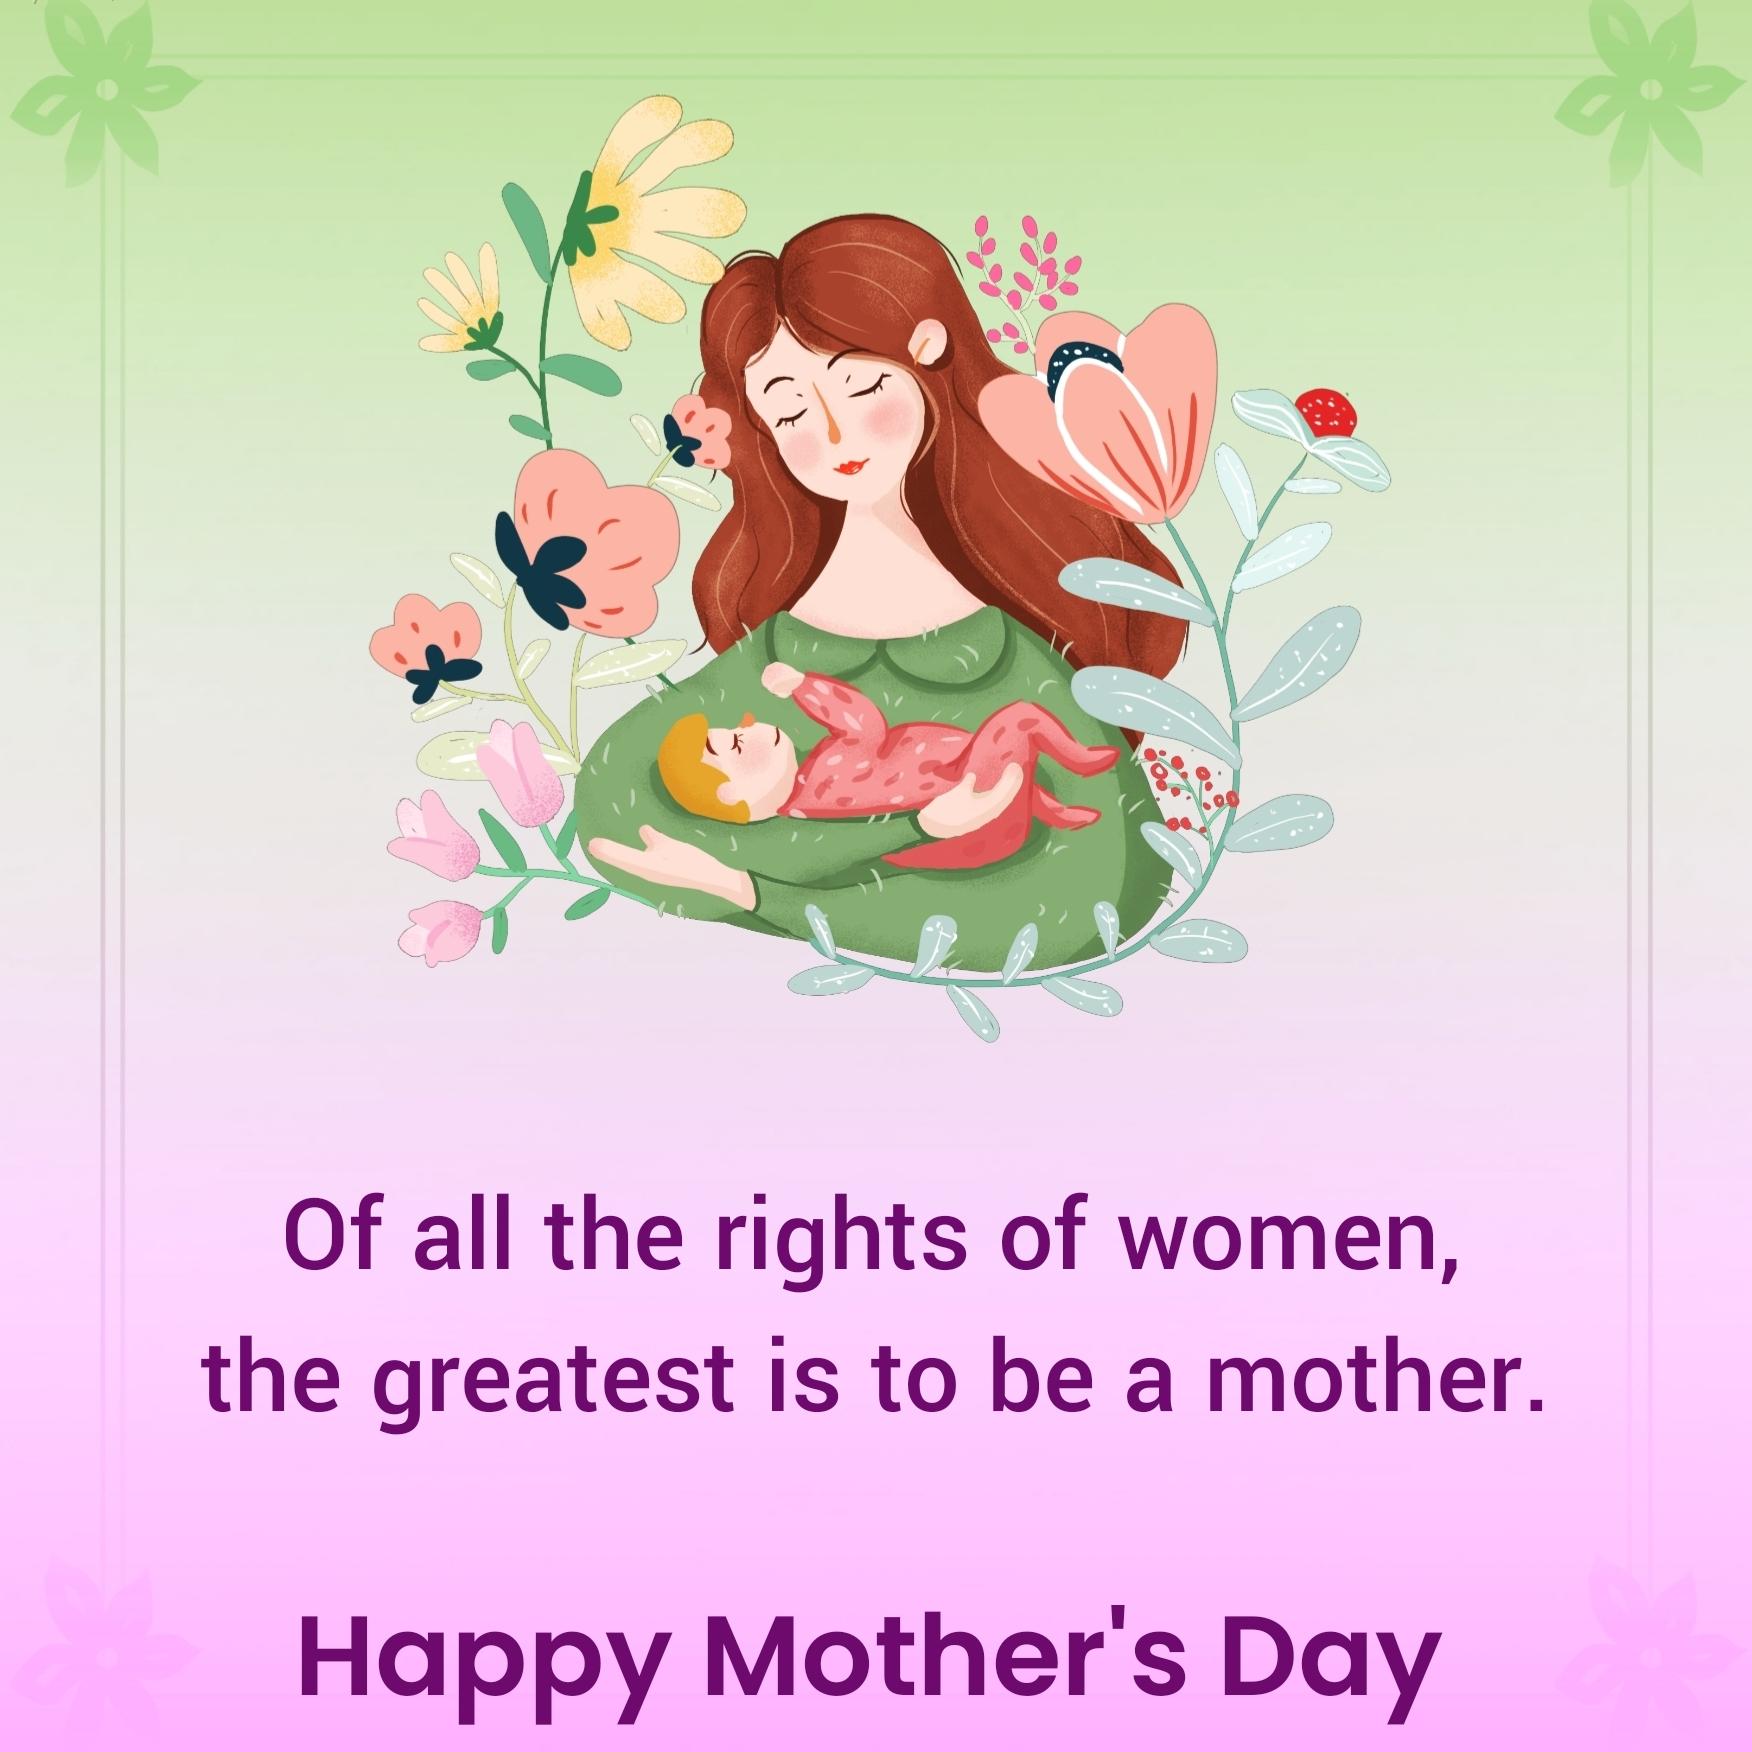 Of all the rights of women the greatest is to be a mother